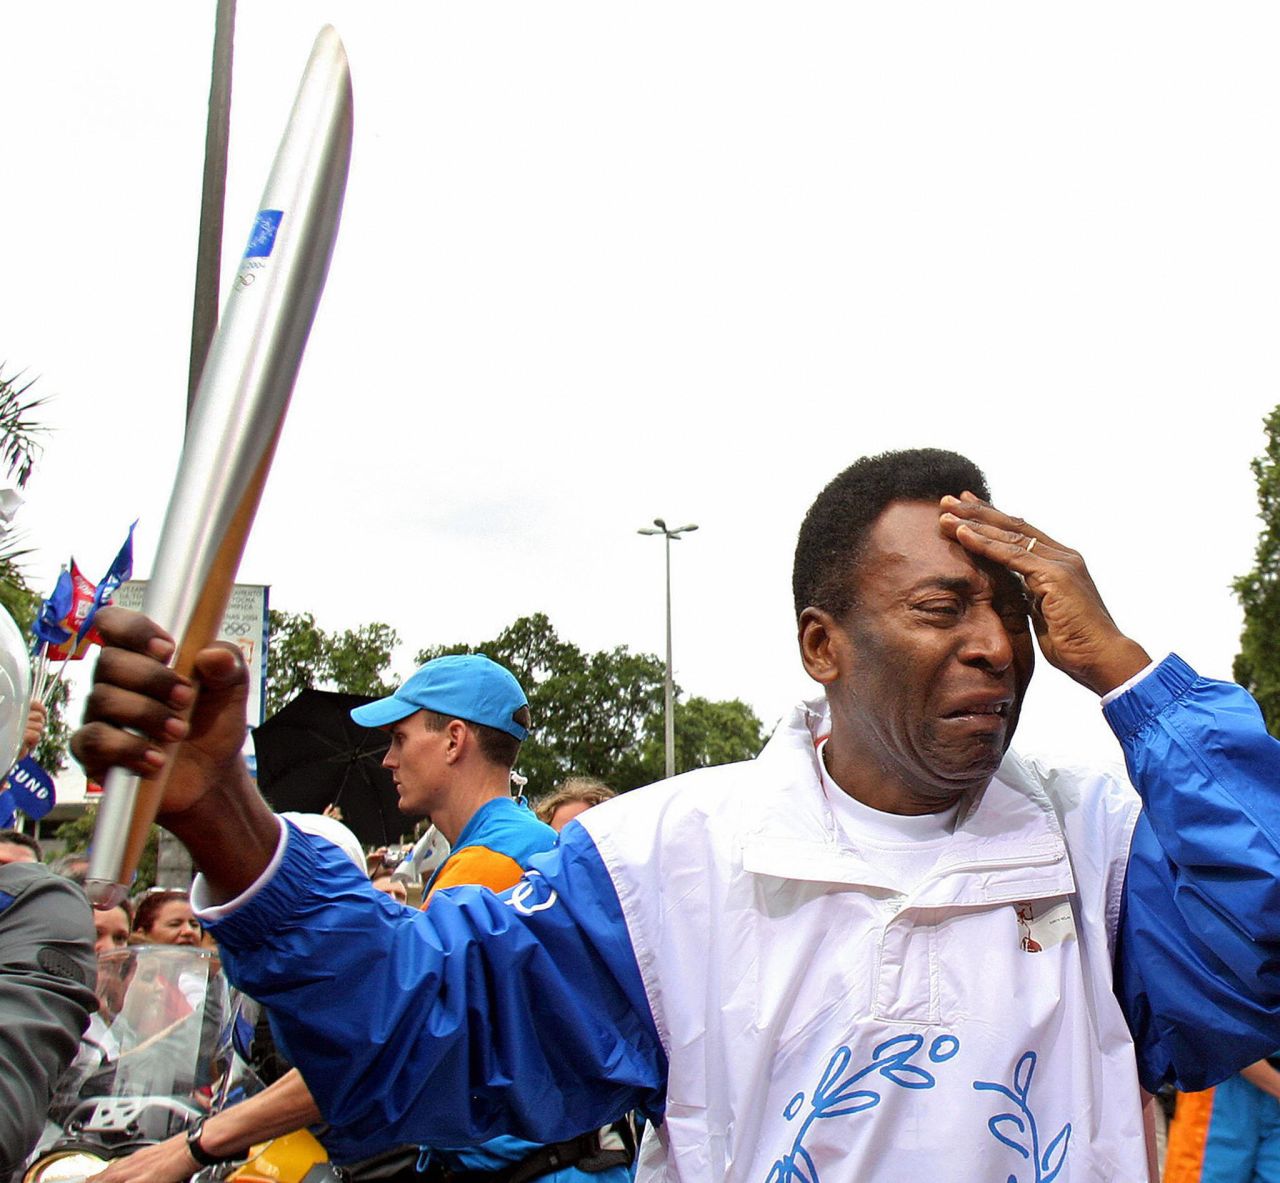 Brazil football legend Pele sheds tears as he carries the torch for the 2008 Beijing Olympics on its visit to Rio. Brazil will host the Summer Games in 2016.